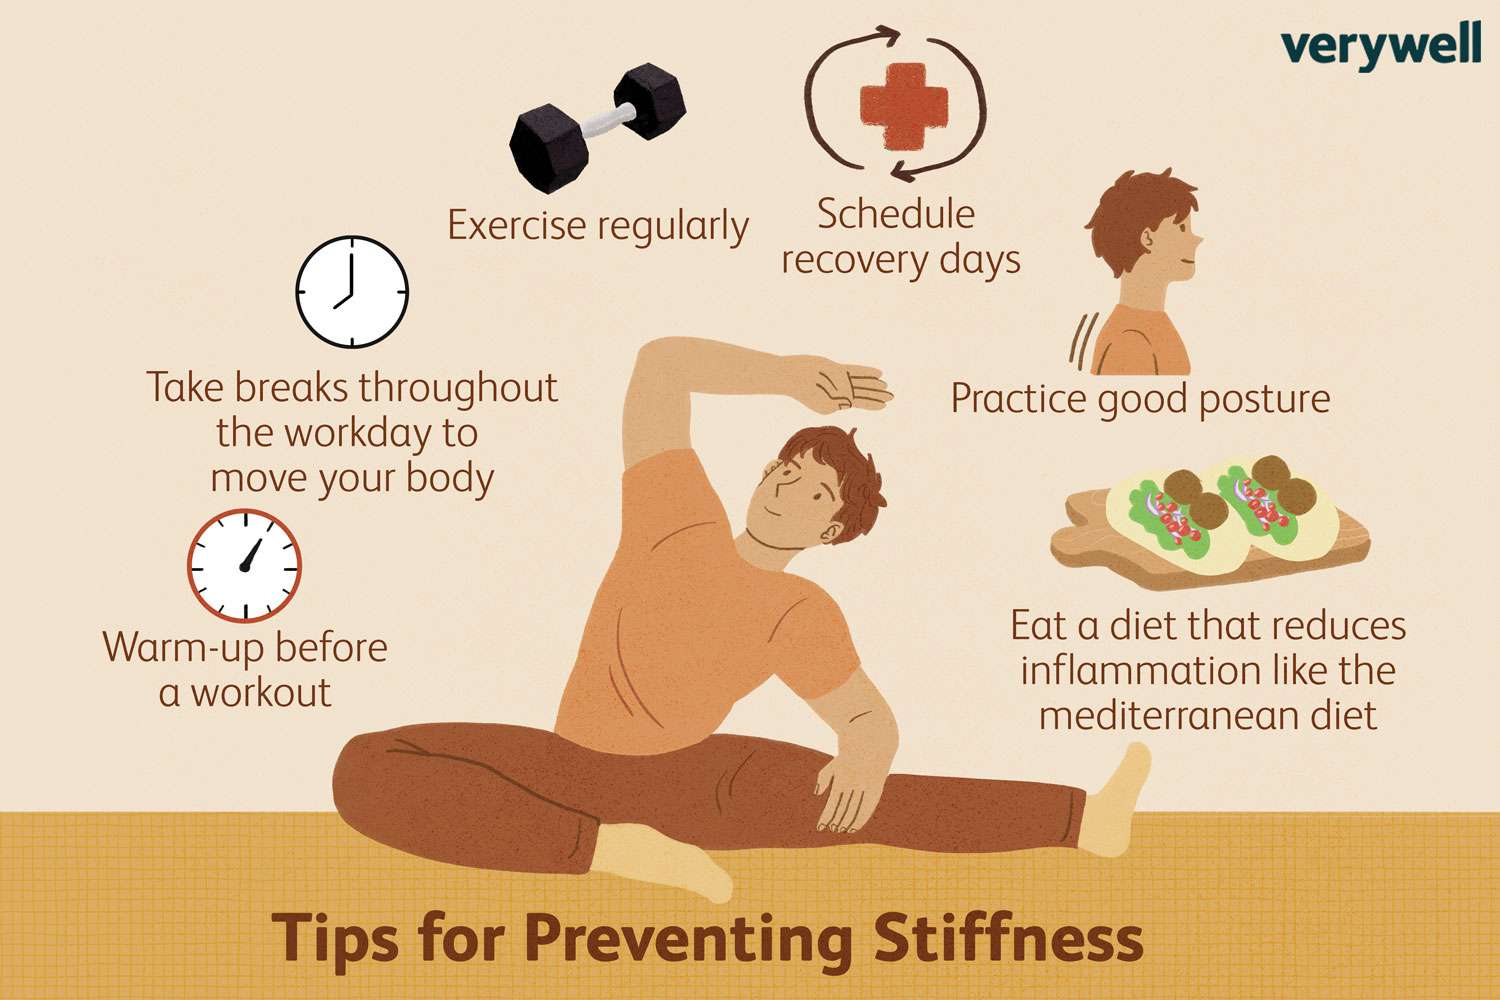 Tips for preventing stiffness